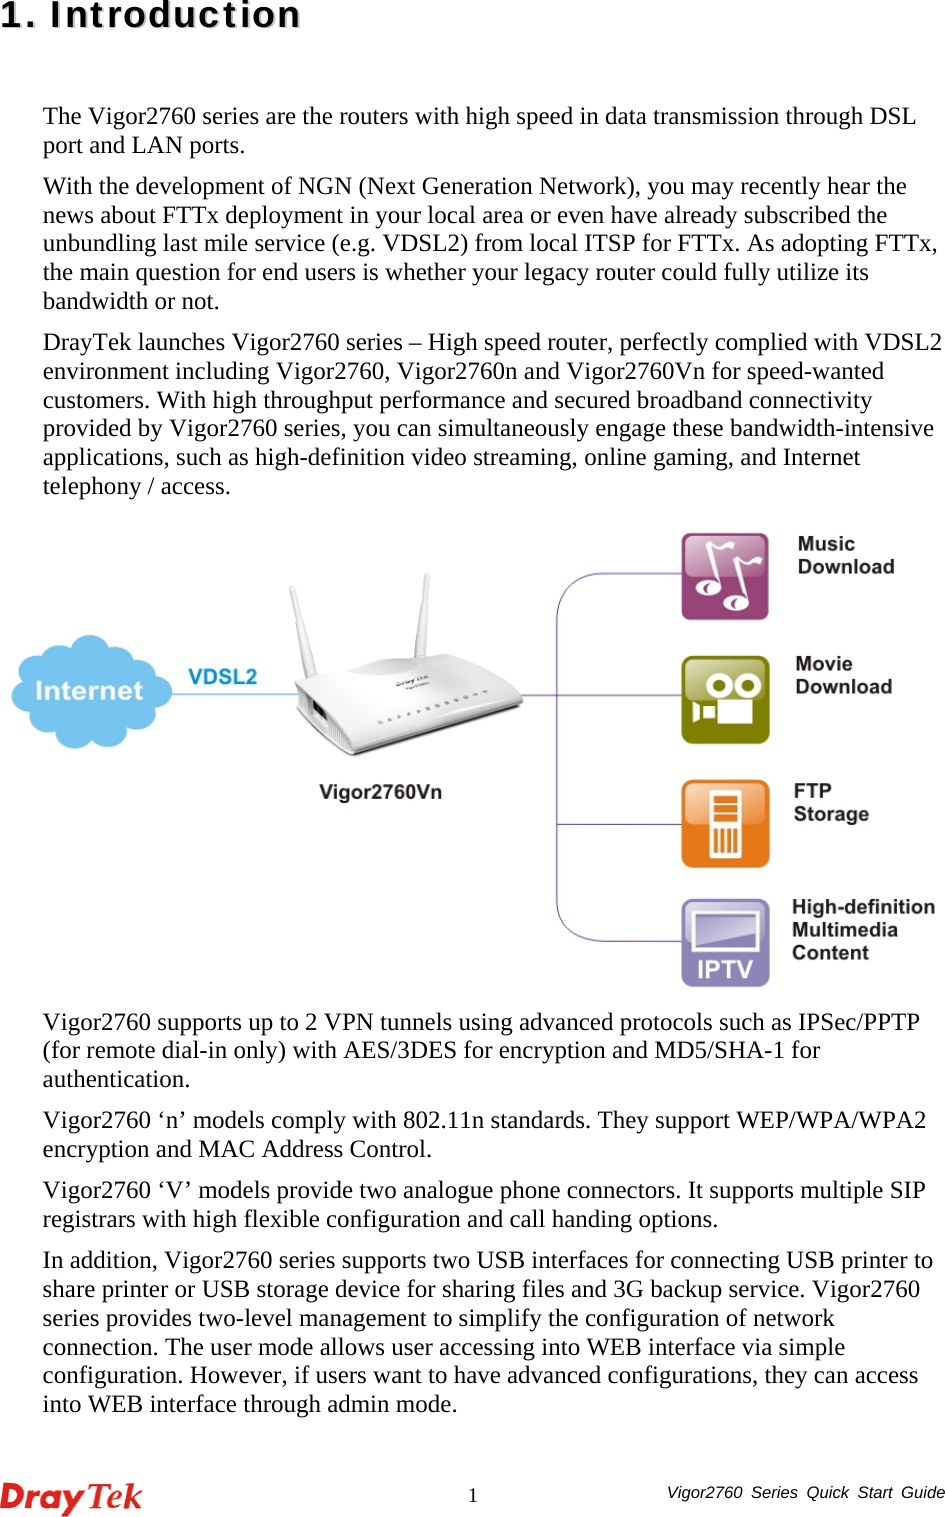  Vigor2760 Series Quick Start Guide 111..  IInnttrroodduuccttiioonn  The Vigor2760 series are the routers with high speed in data transmission through DSL port and LAN ports. With the development of NGN (Next Generation Network), you may recently hear the news about FTTx deployment in your local area or even have already subscribed the unbundling last mile service (e.g. VDSL2) from local ITSP for FTTx. As adopting FTTx, the main question for end users is whether your legacy router could fully utilize its bandwidth or not.   DrayTek launches Vigor2760 series – High speed router, perfectly complied with VDSL2 environment including Vigor2760, Vigor2760n and Vigor2760Vn for speed-wanted customers. With high throughput performance and secured broadband connectivity provided by Vigor2760 series, you can simultaneously engage these bandwidth-intensive applications, such as high-definition video streaming, online gaming, and Internet telephony / access.  Vigor2760 supports up to 2 VPN tunnels using advanced protocols such as IPSec/PPTP (for remote dial-in only) with AES/3DES for encryption and MD5/SHA-1 for authentication.  Vigor2760 ‘n’ models comply with 802.11n standards. They support WEP/WPA/WPA2 encryption and MAC Address Control.   Vigor2760 ‘V’ models provide two analogue phone connectors. It supports multiple SIP registrars with high flexible configuration and call handing options. In addition, Vigor2760 series supports two USB interfaces for connecting USB printer to share printer or USB storage device for sharing files and 3G backup service. Vigor2760 series provides two-level management to simplify the configuration of network connection. The user mode allows user accessing into WEB interface via simple configuration. However, if users want to have advanced configurations, they can access into WEB interface through admin mode.   